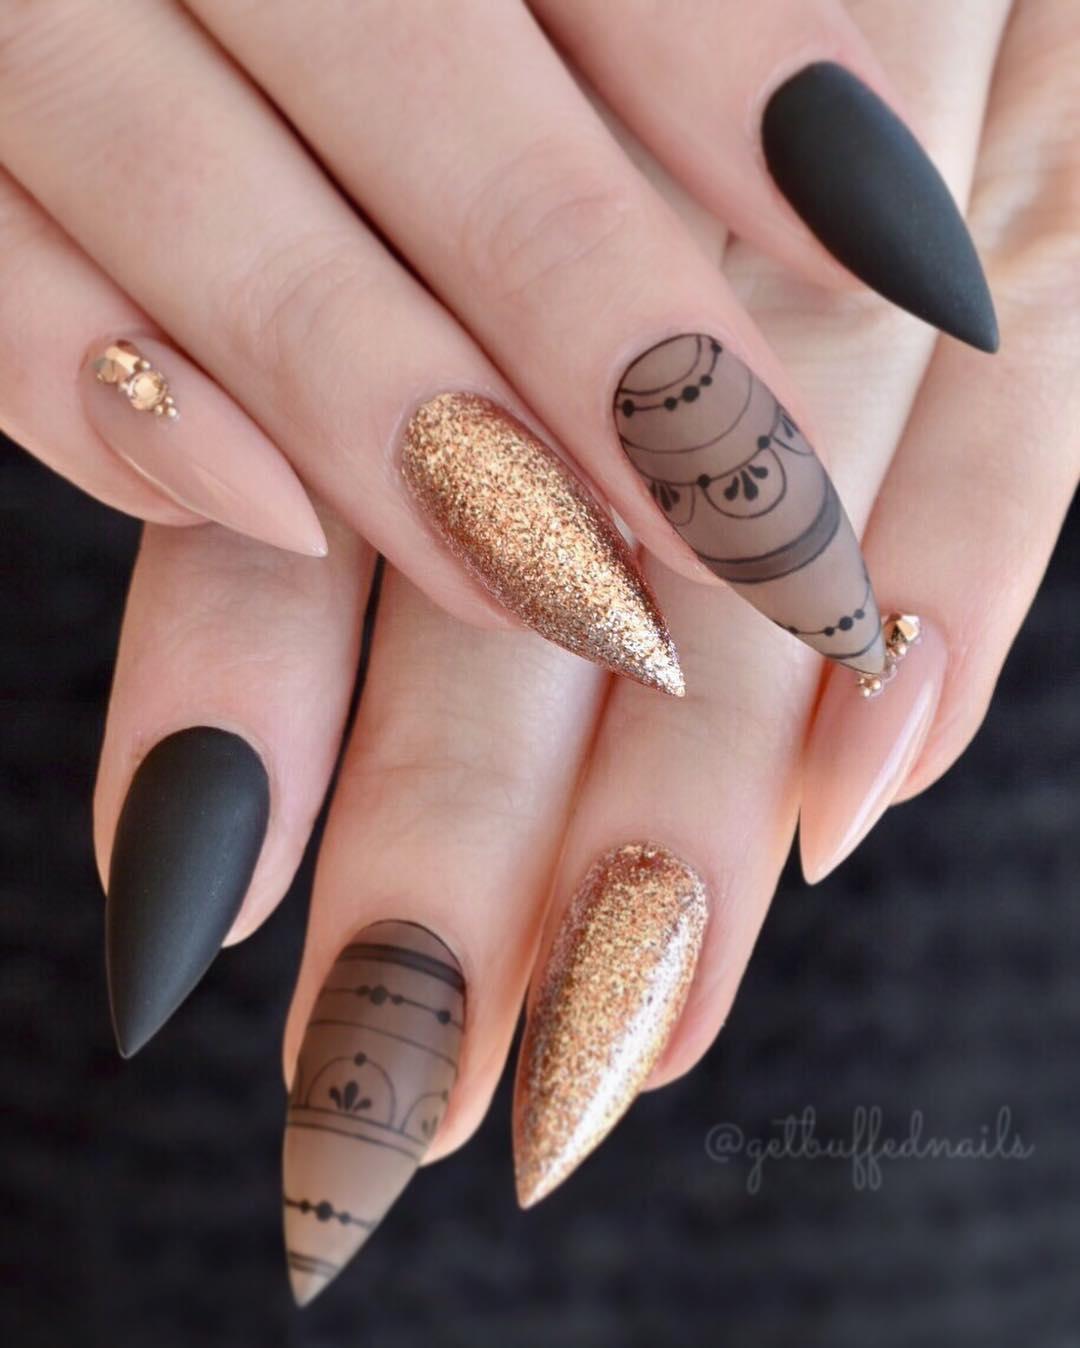 Makeup Ideas for Date Night : Beautiful Nails Ideas for Date Night: Pretty Nails  